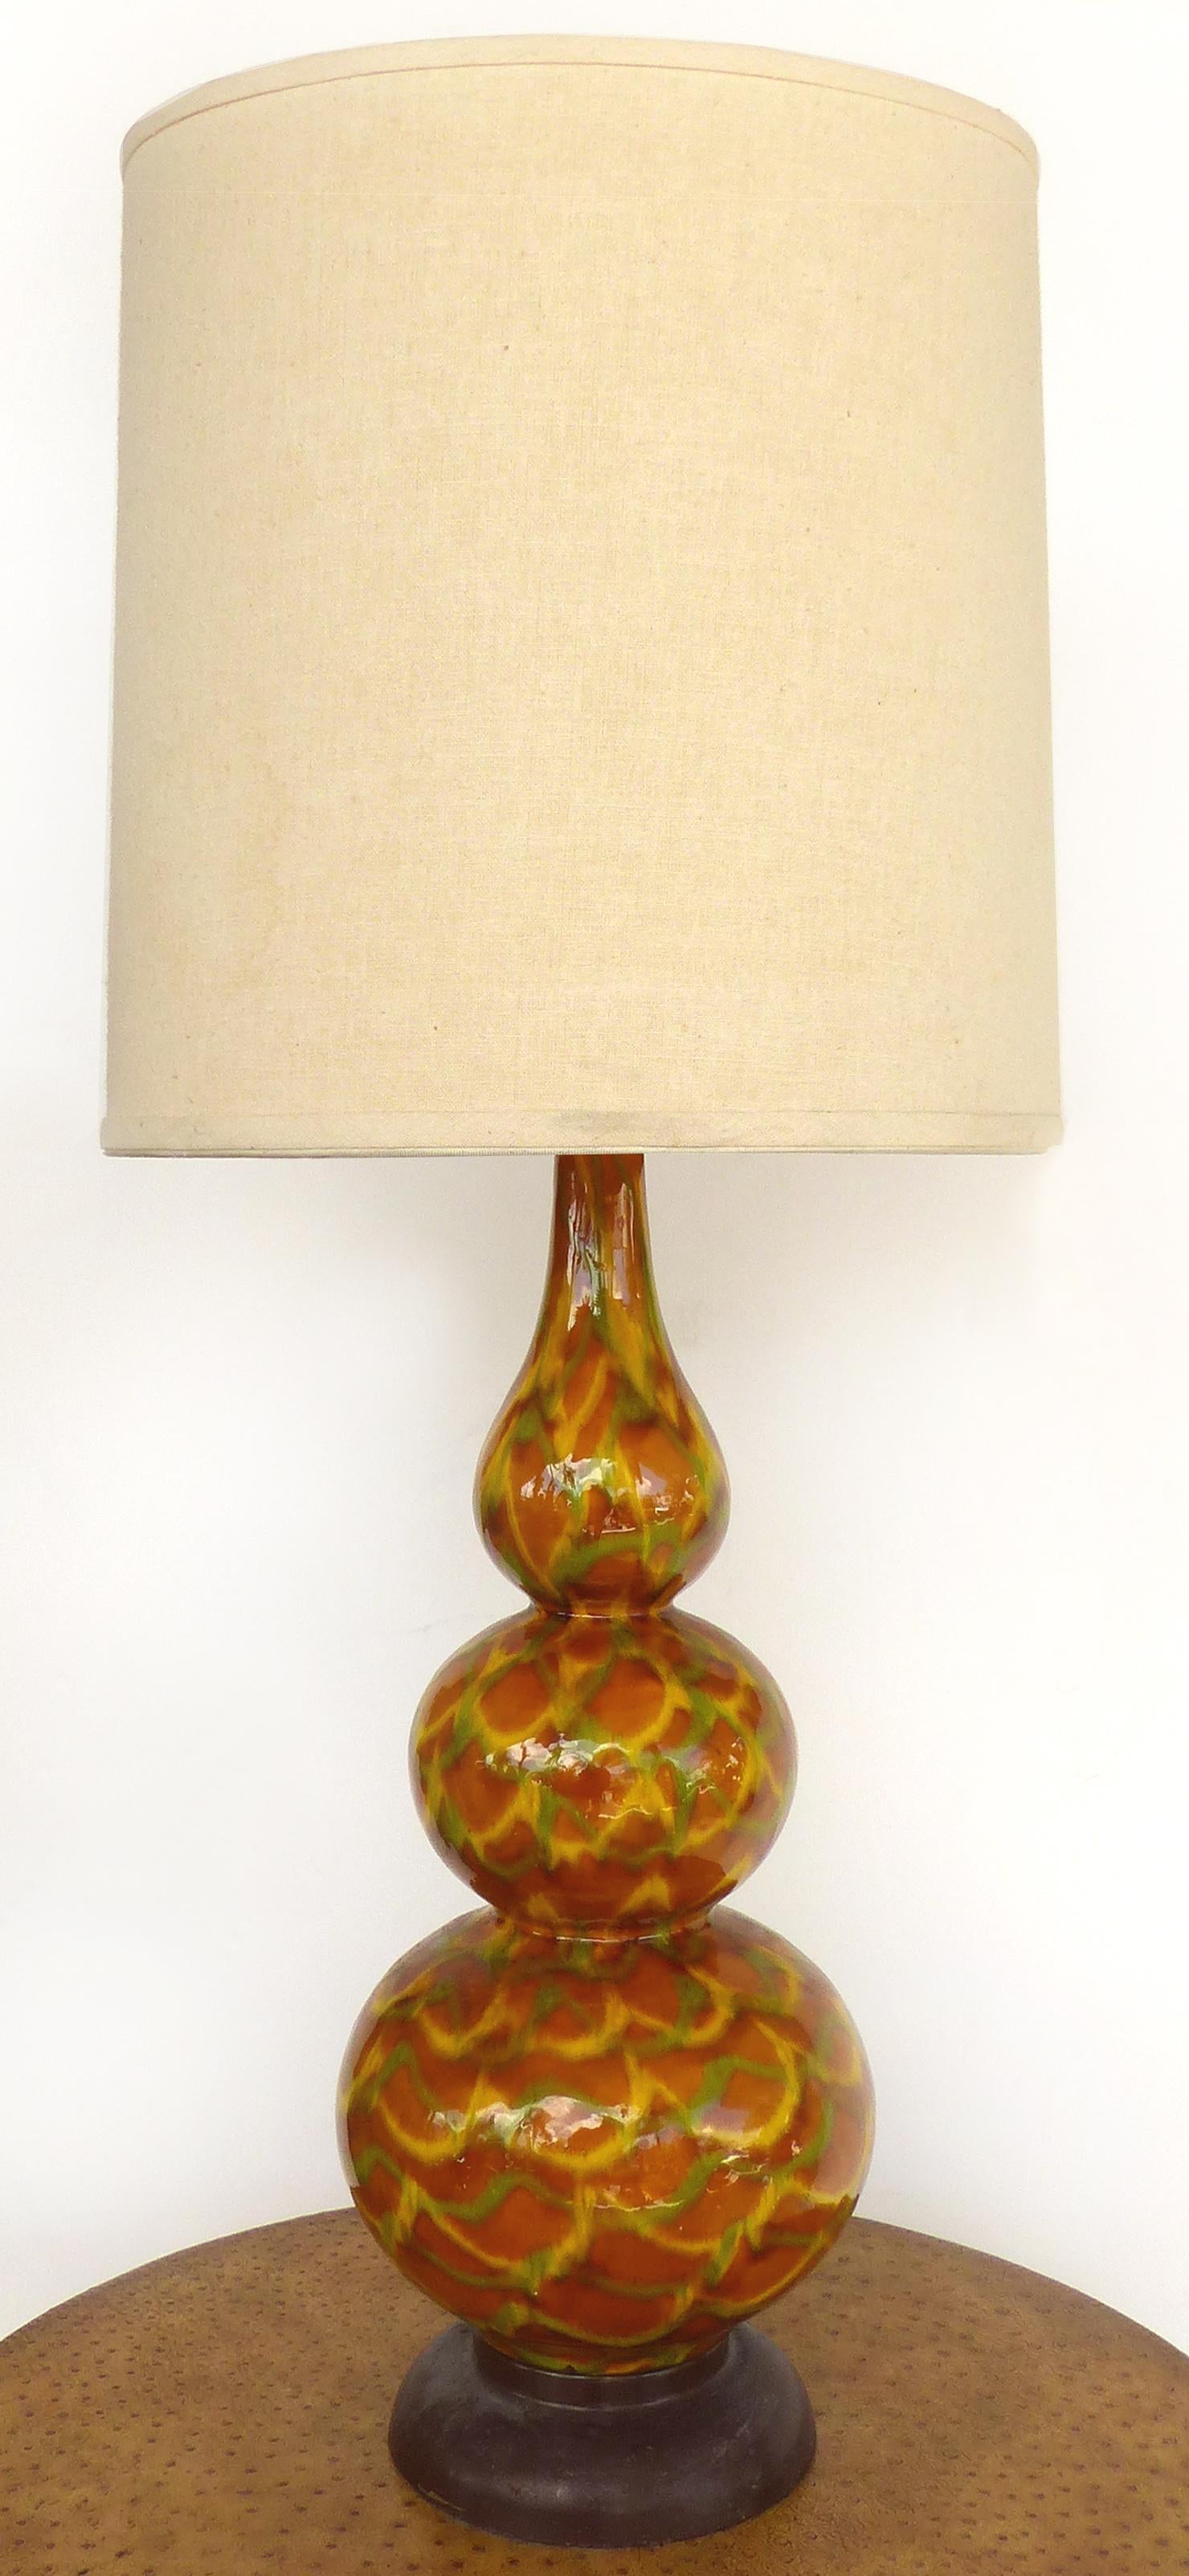 Mid-Century Modern glazed ceramic table lamps

Offered for sale is a pair of glazed ceramic Mid-Century Modern table lamps. Both lamps are wired and in working condition. Shades pictured are not included. The lamps have a single socket which